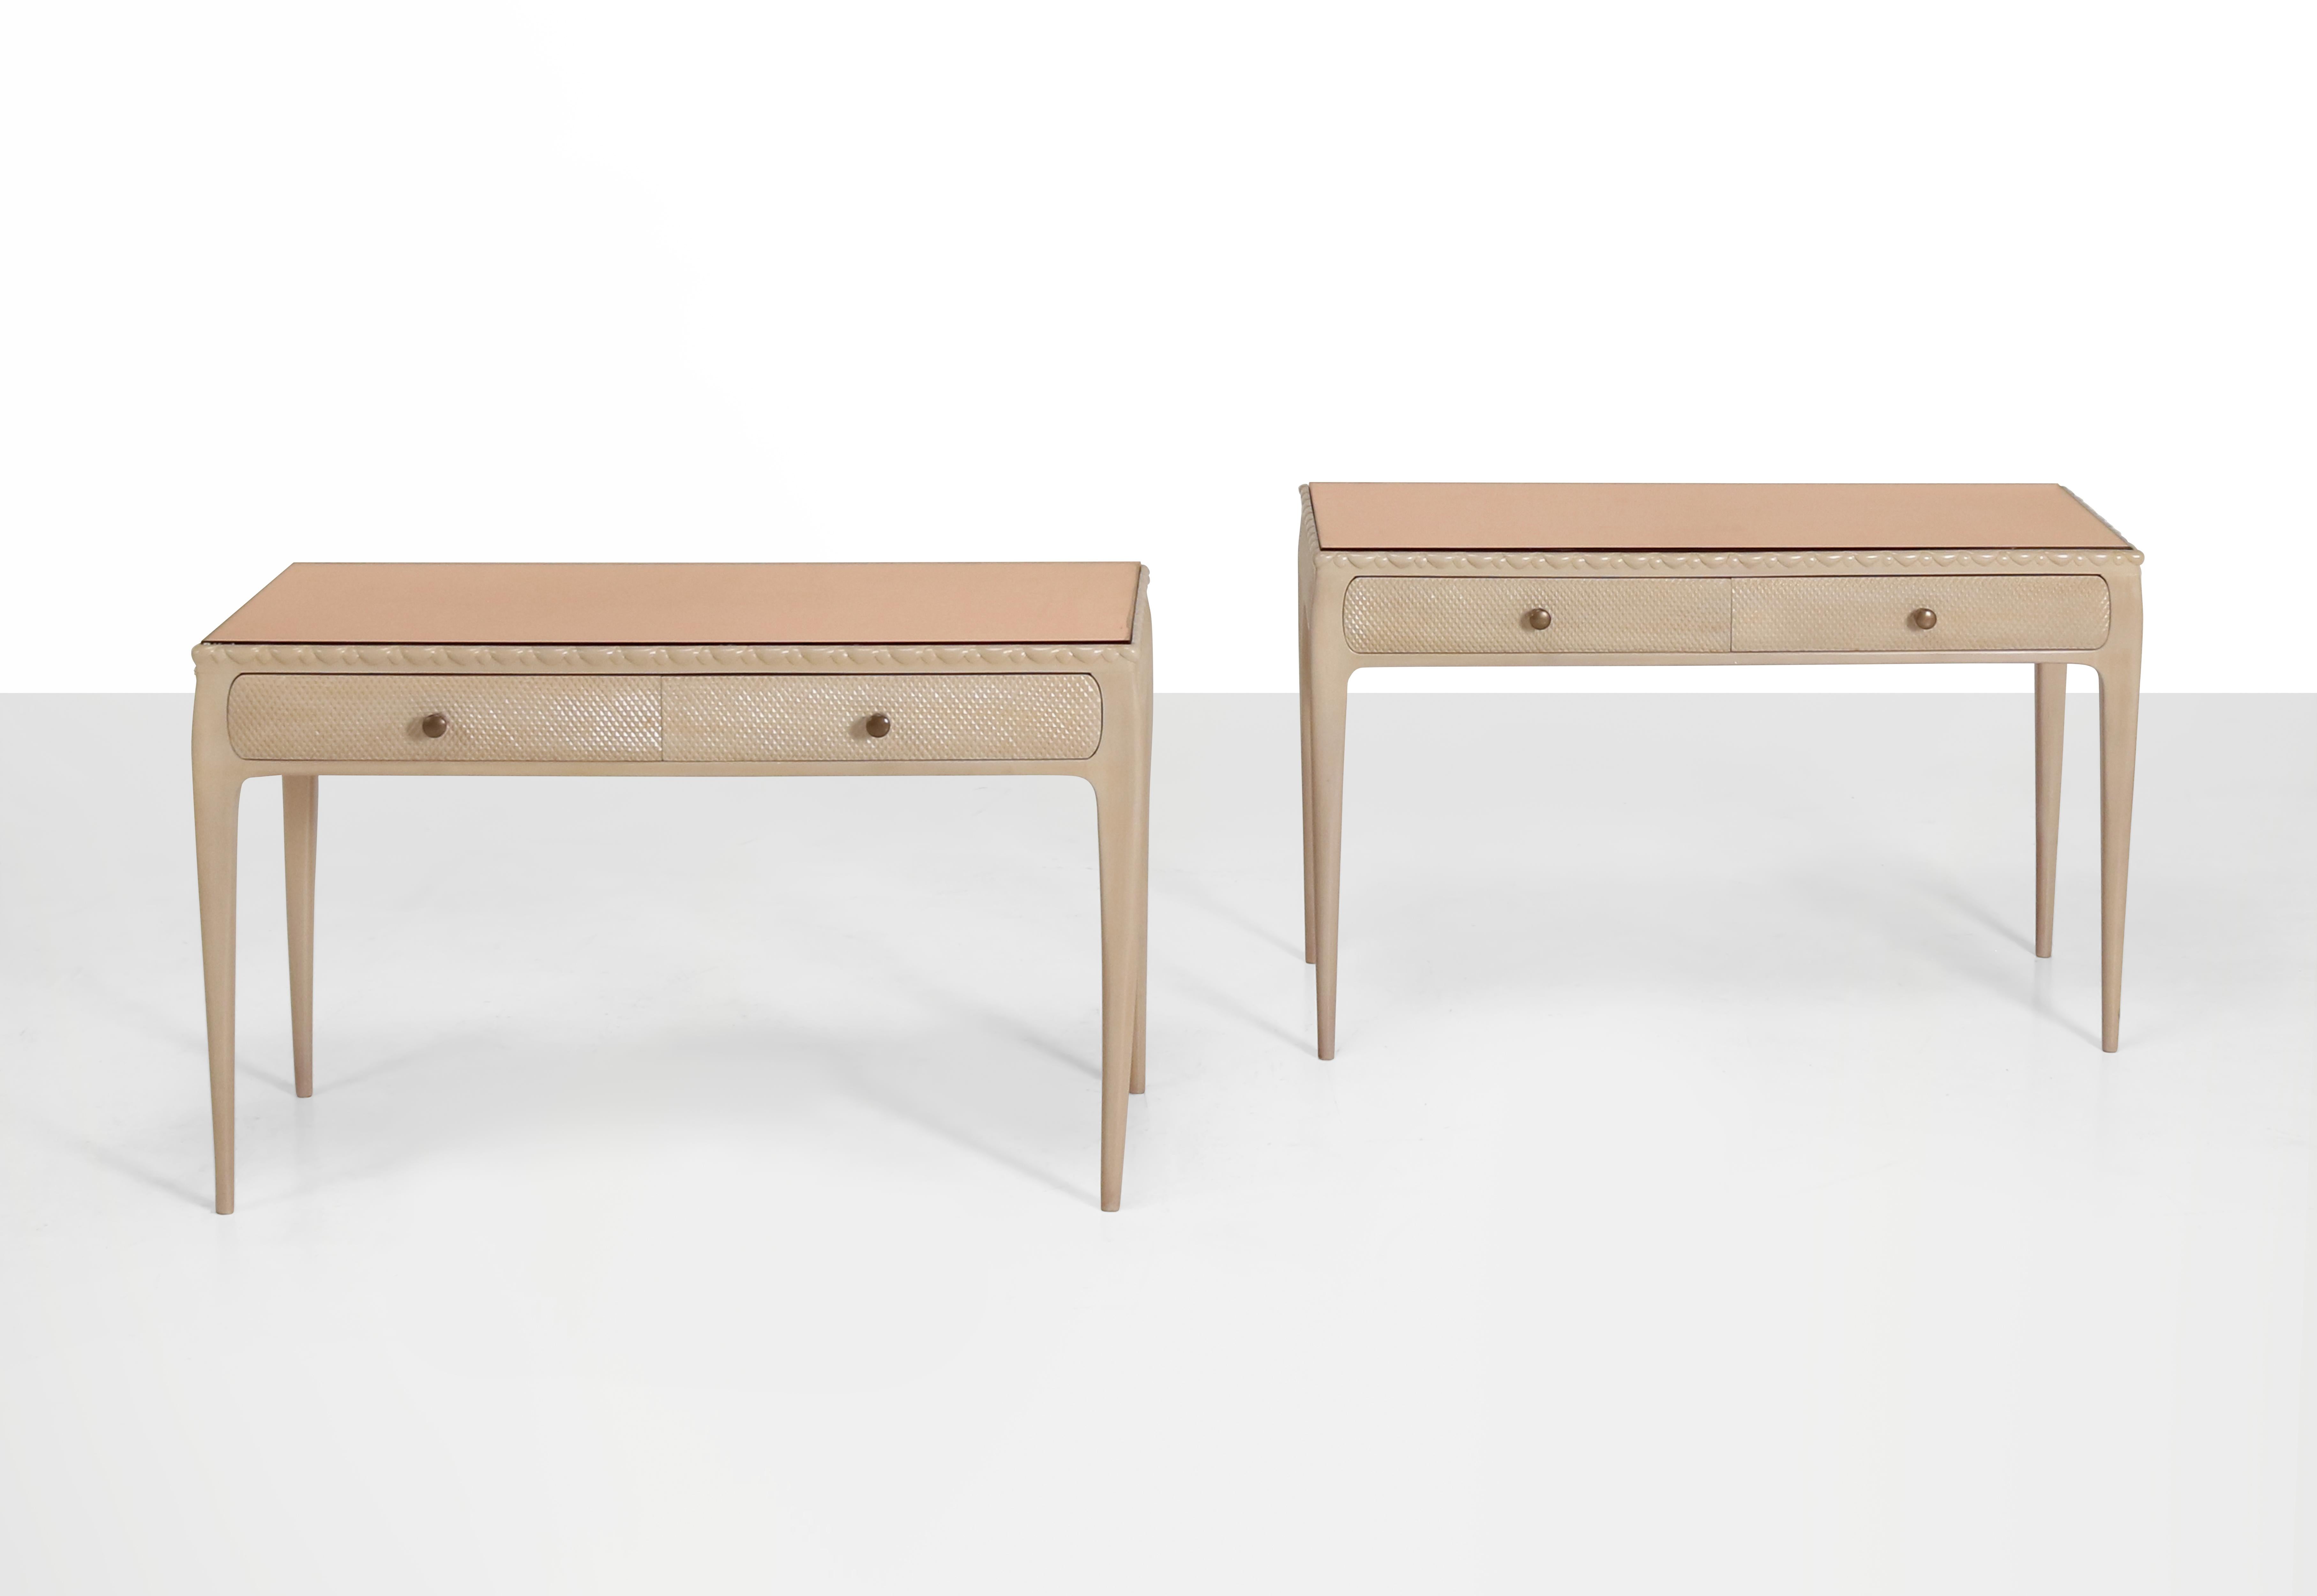 Osvaldo Borsani Elegant Two bed side tables with drawers Italian Design ABV 1950 In Good Condition For Sale In Milan, IT